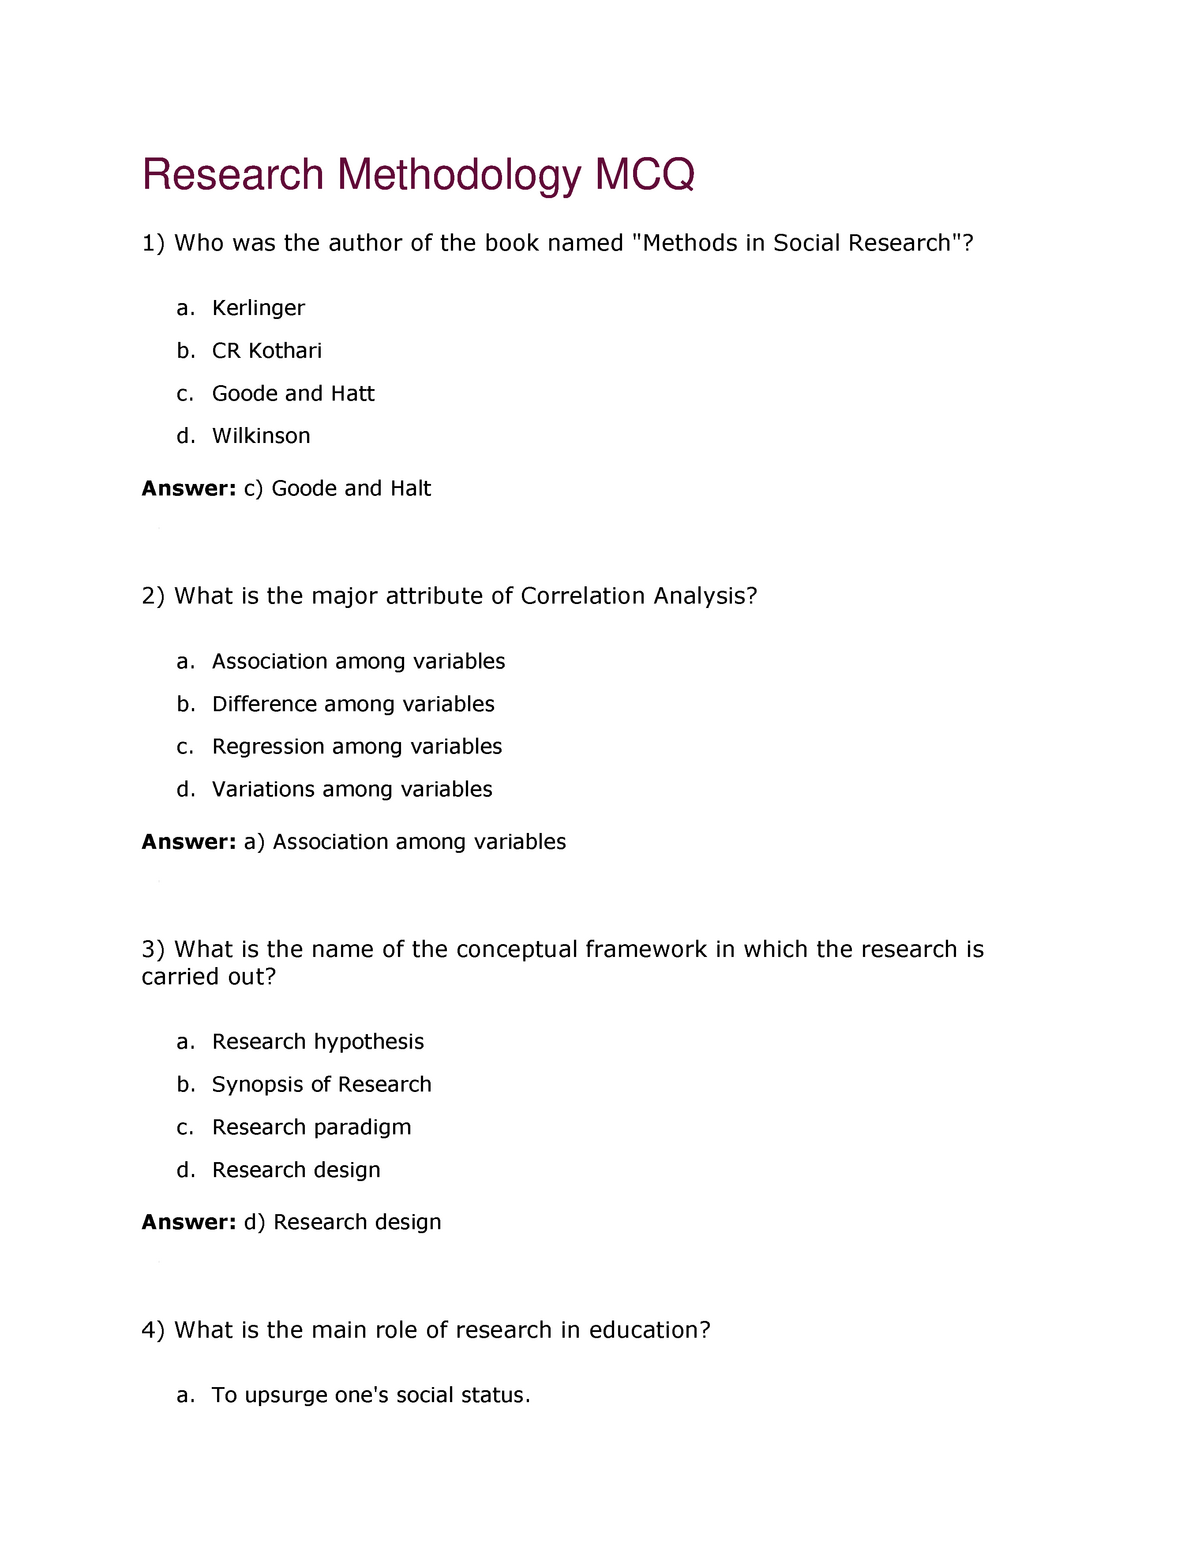 what is hypothesis in research methodology mcq